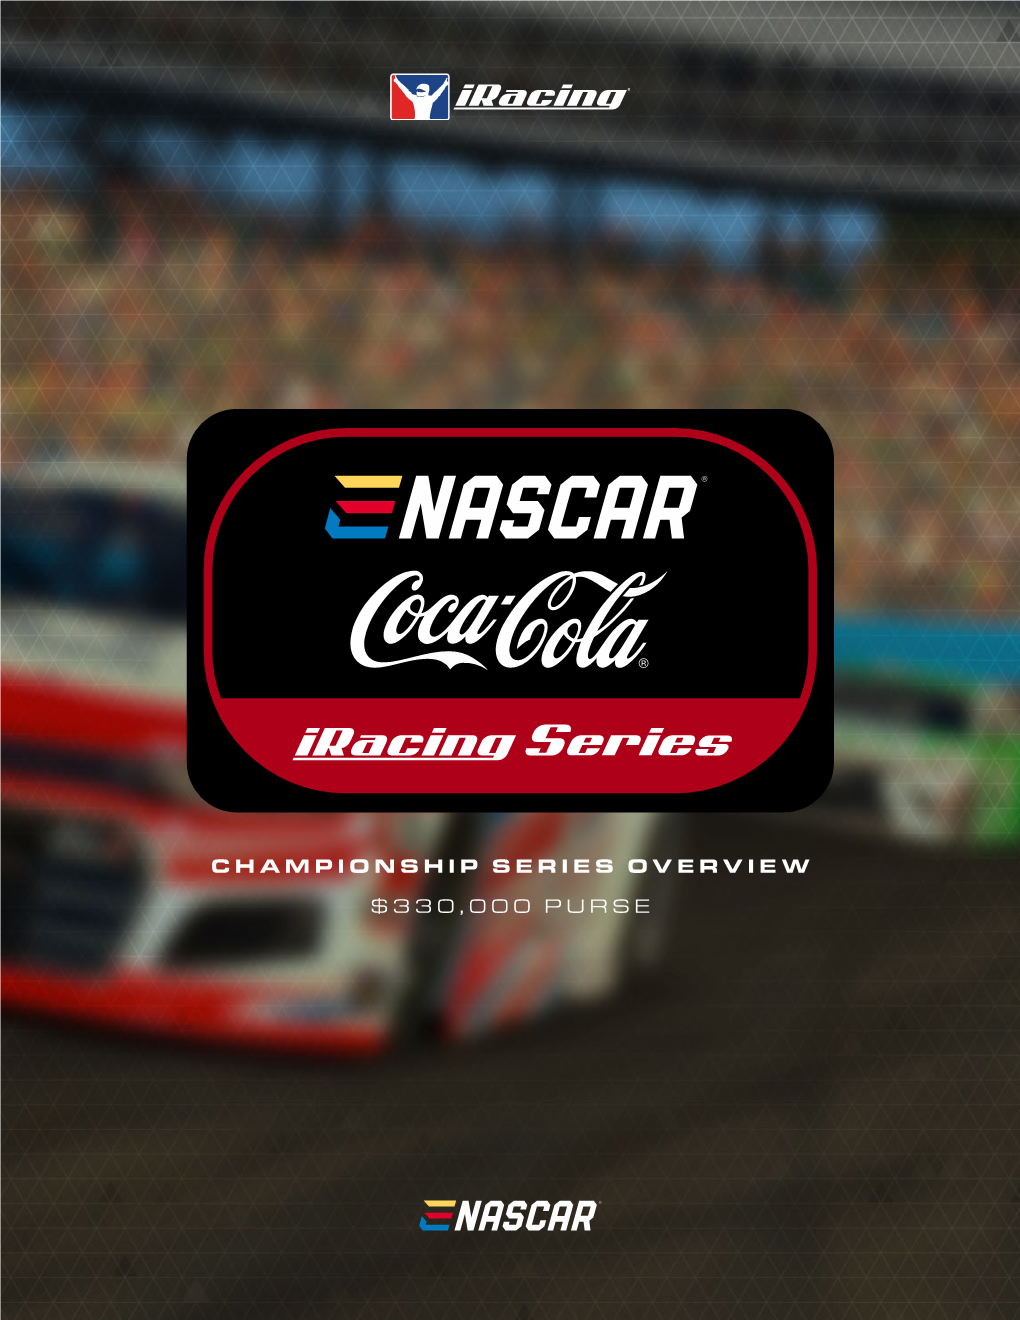 CHAMPIONSHIP SERIES OVERVIEW $330,000 PURSE Enascar COCA-COLA Iracing SERIES Table of Contents CLICK to VIEW a SECTION